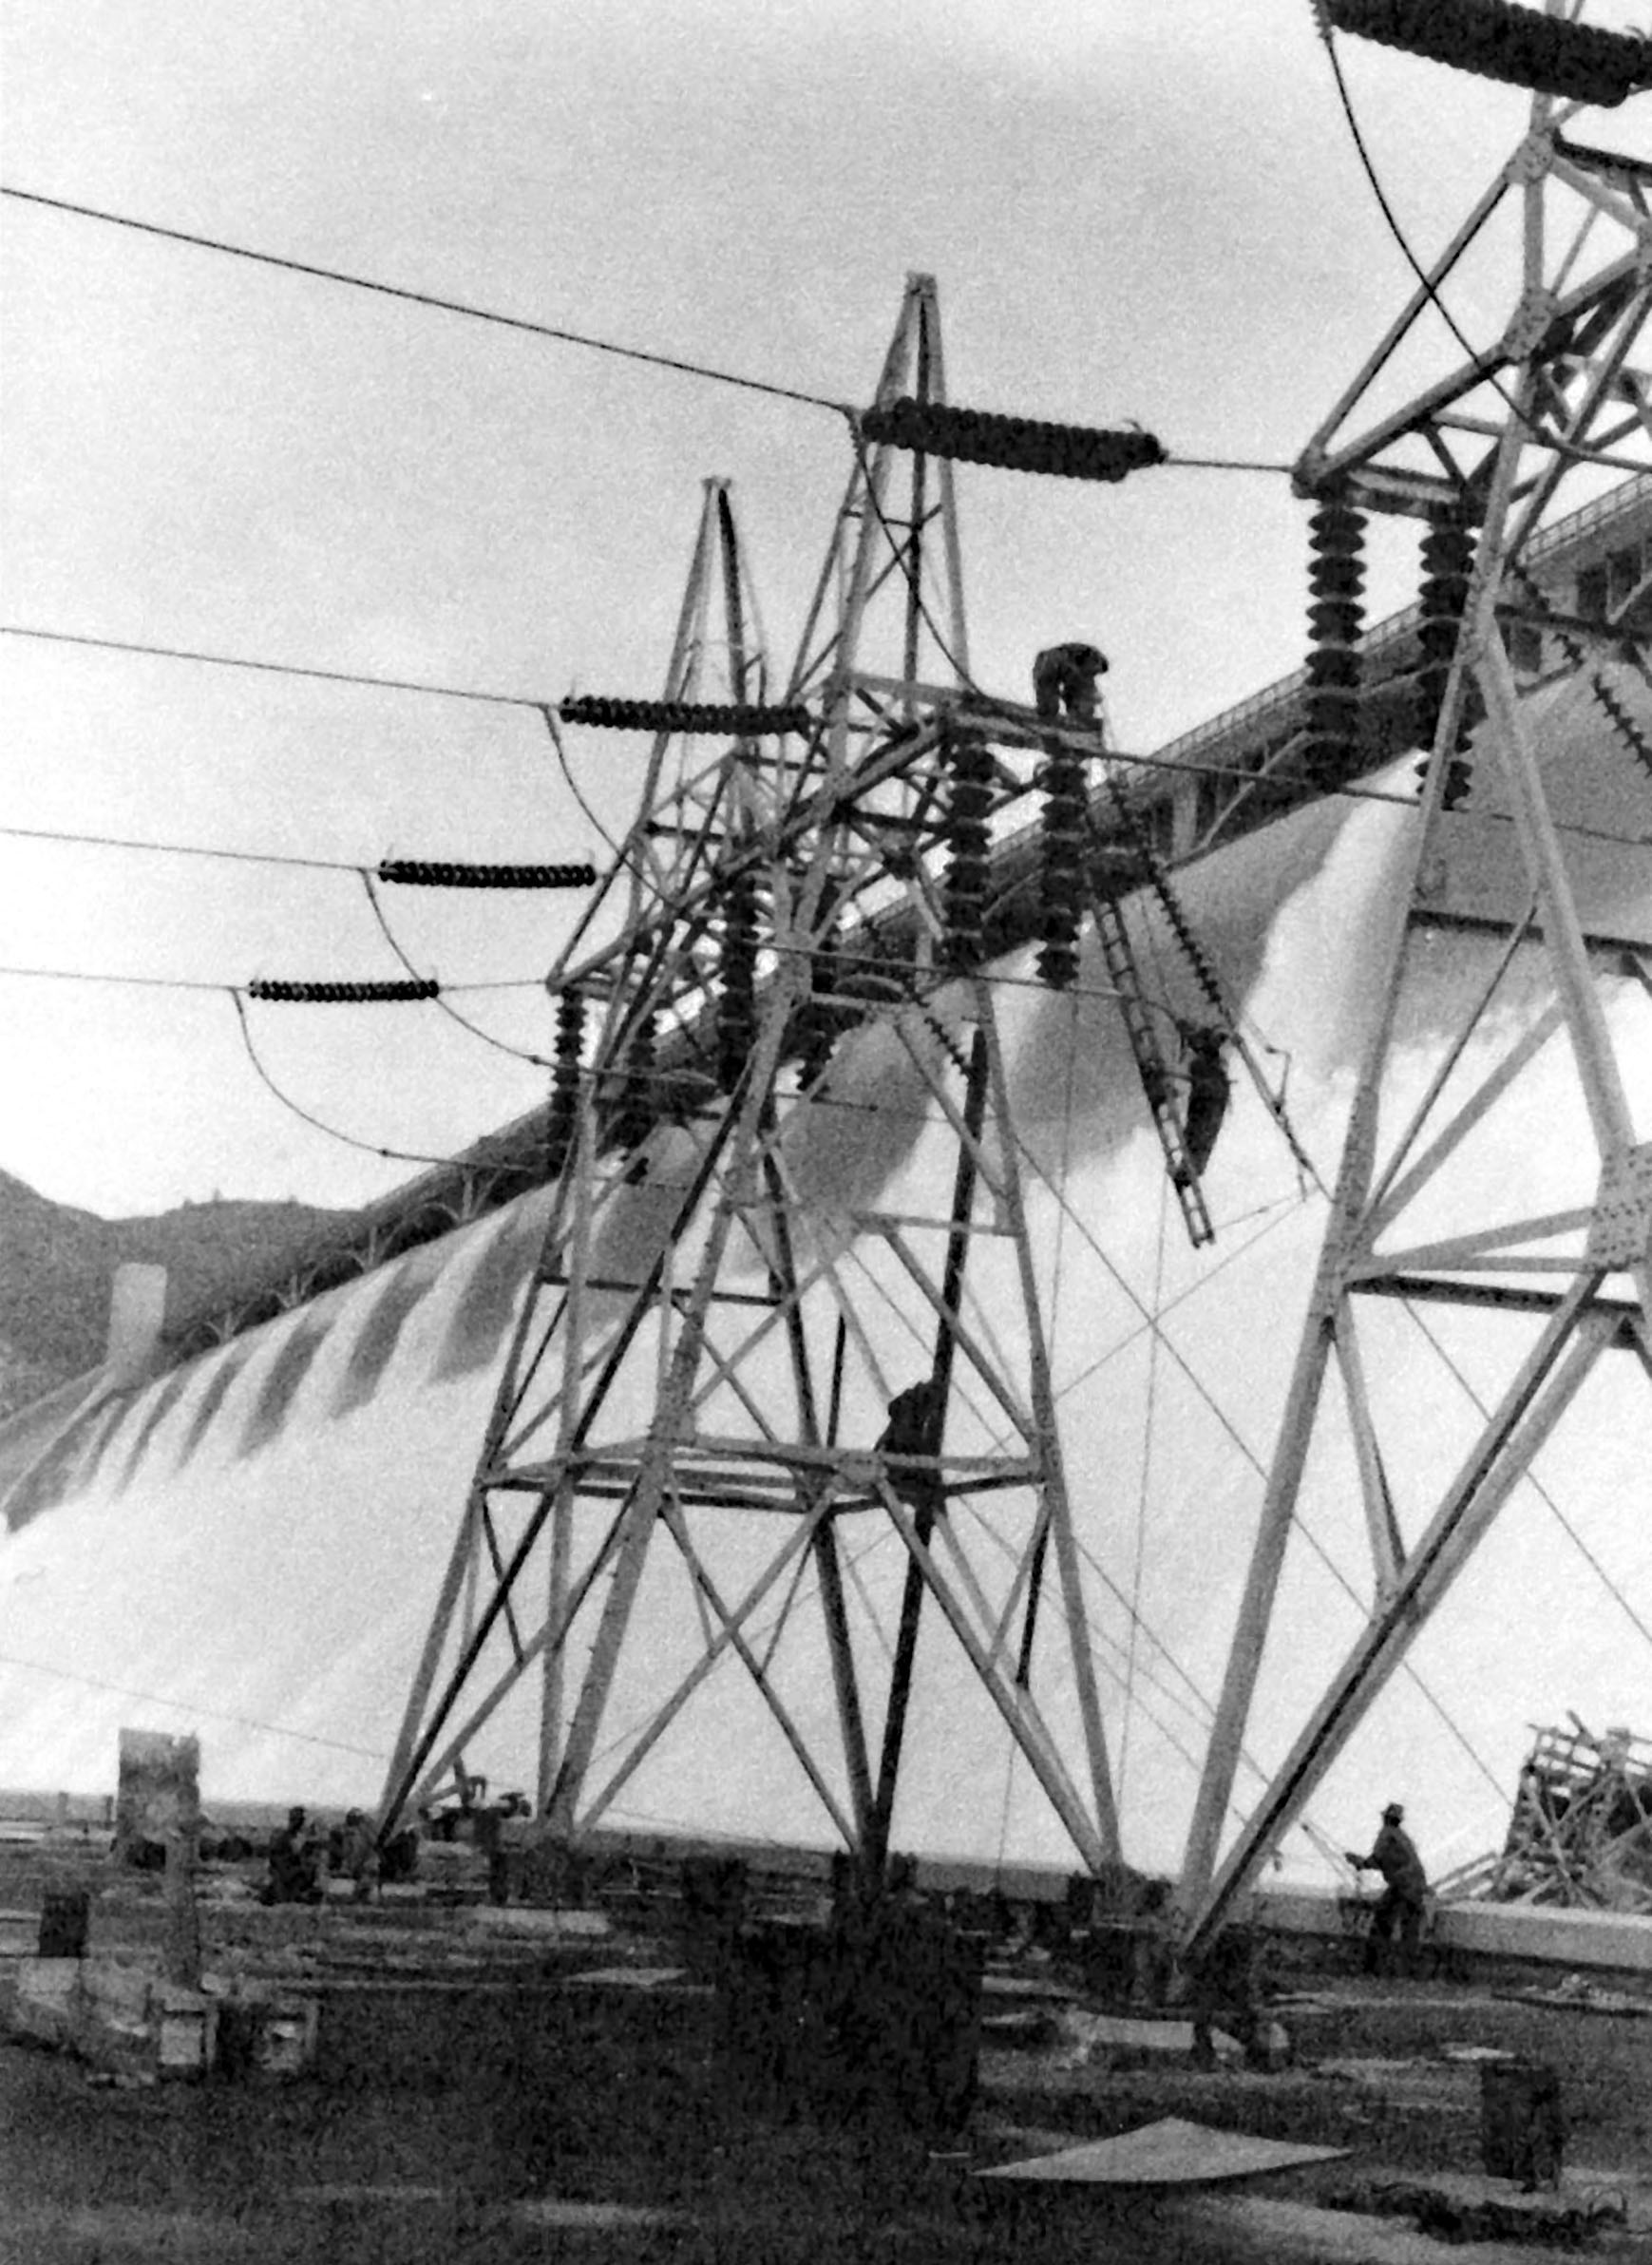 May 3, 1943. Installing transmission lines from the west powerhouse to the 230 KV switchyard at Grand Coulee Dam.